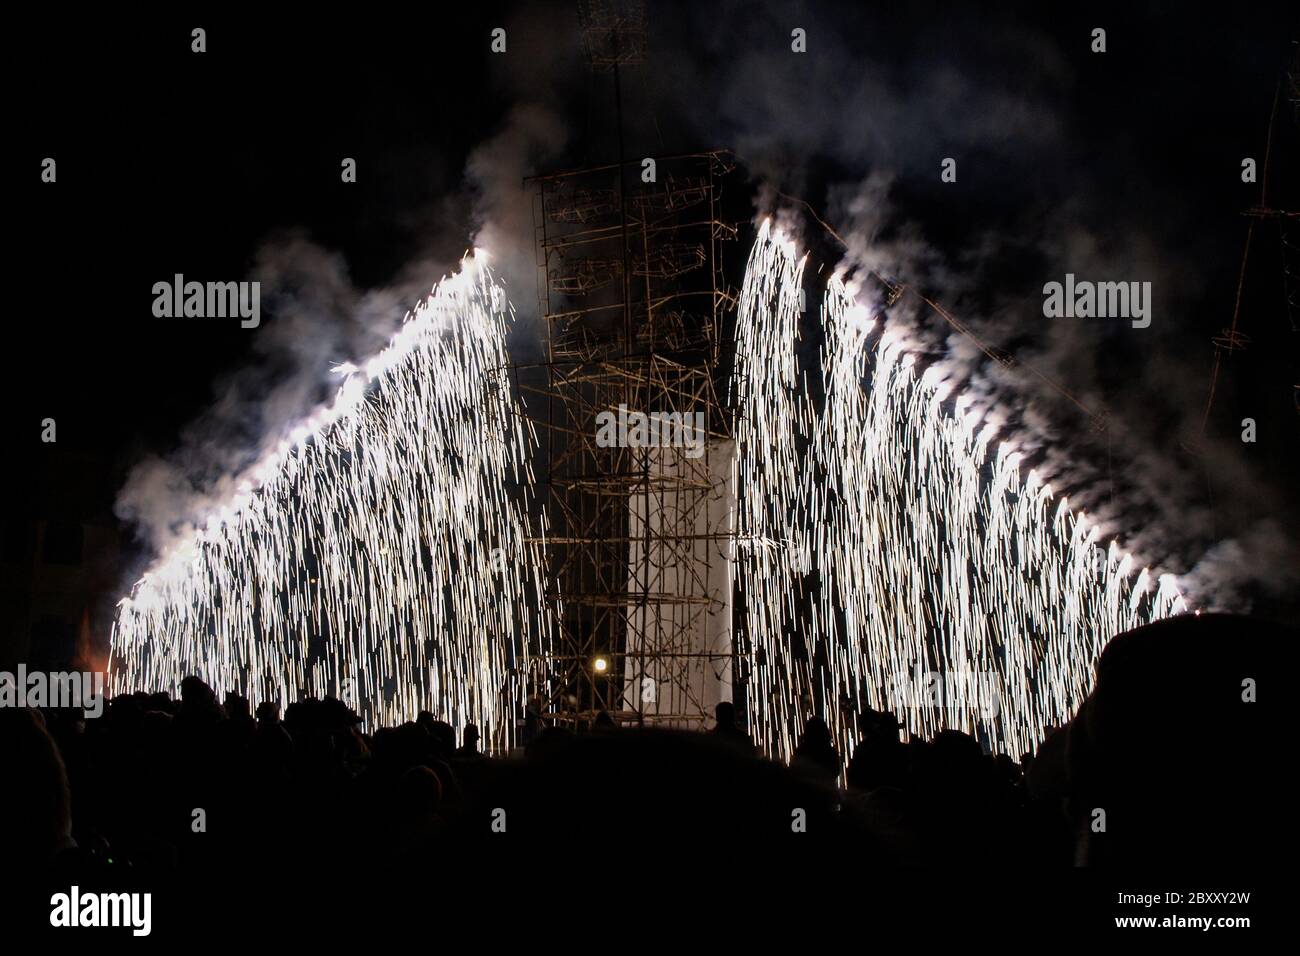 Fireworks made of bamboo structures is typical part of celebrations in Latin America, Peru- Stock Photo